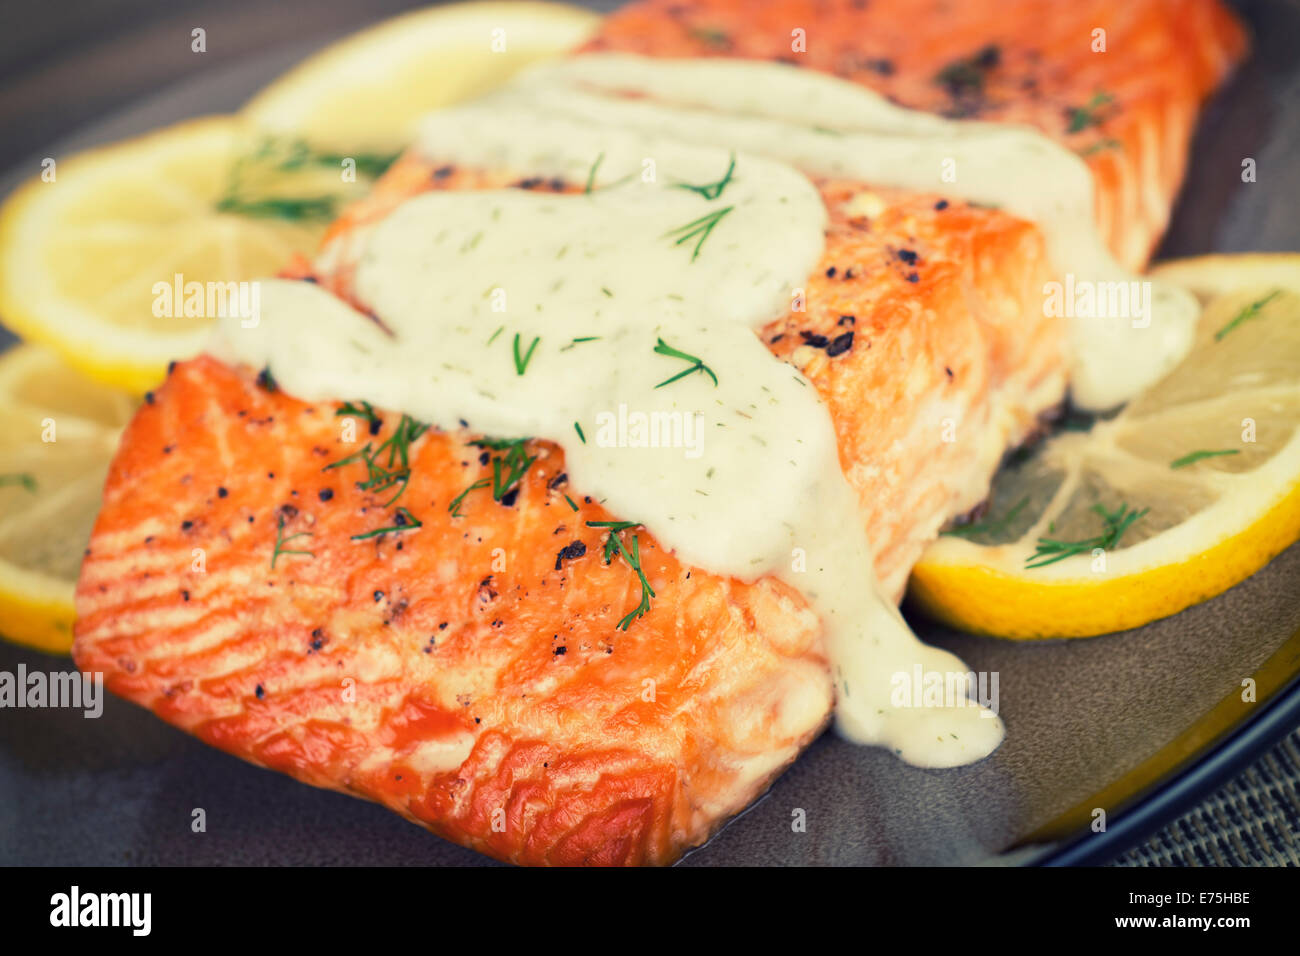 Grilled Salmon Fillet with Dill Sauce Stock Photo